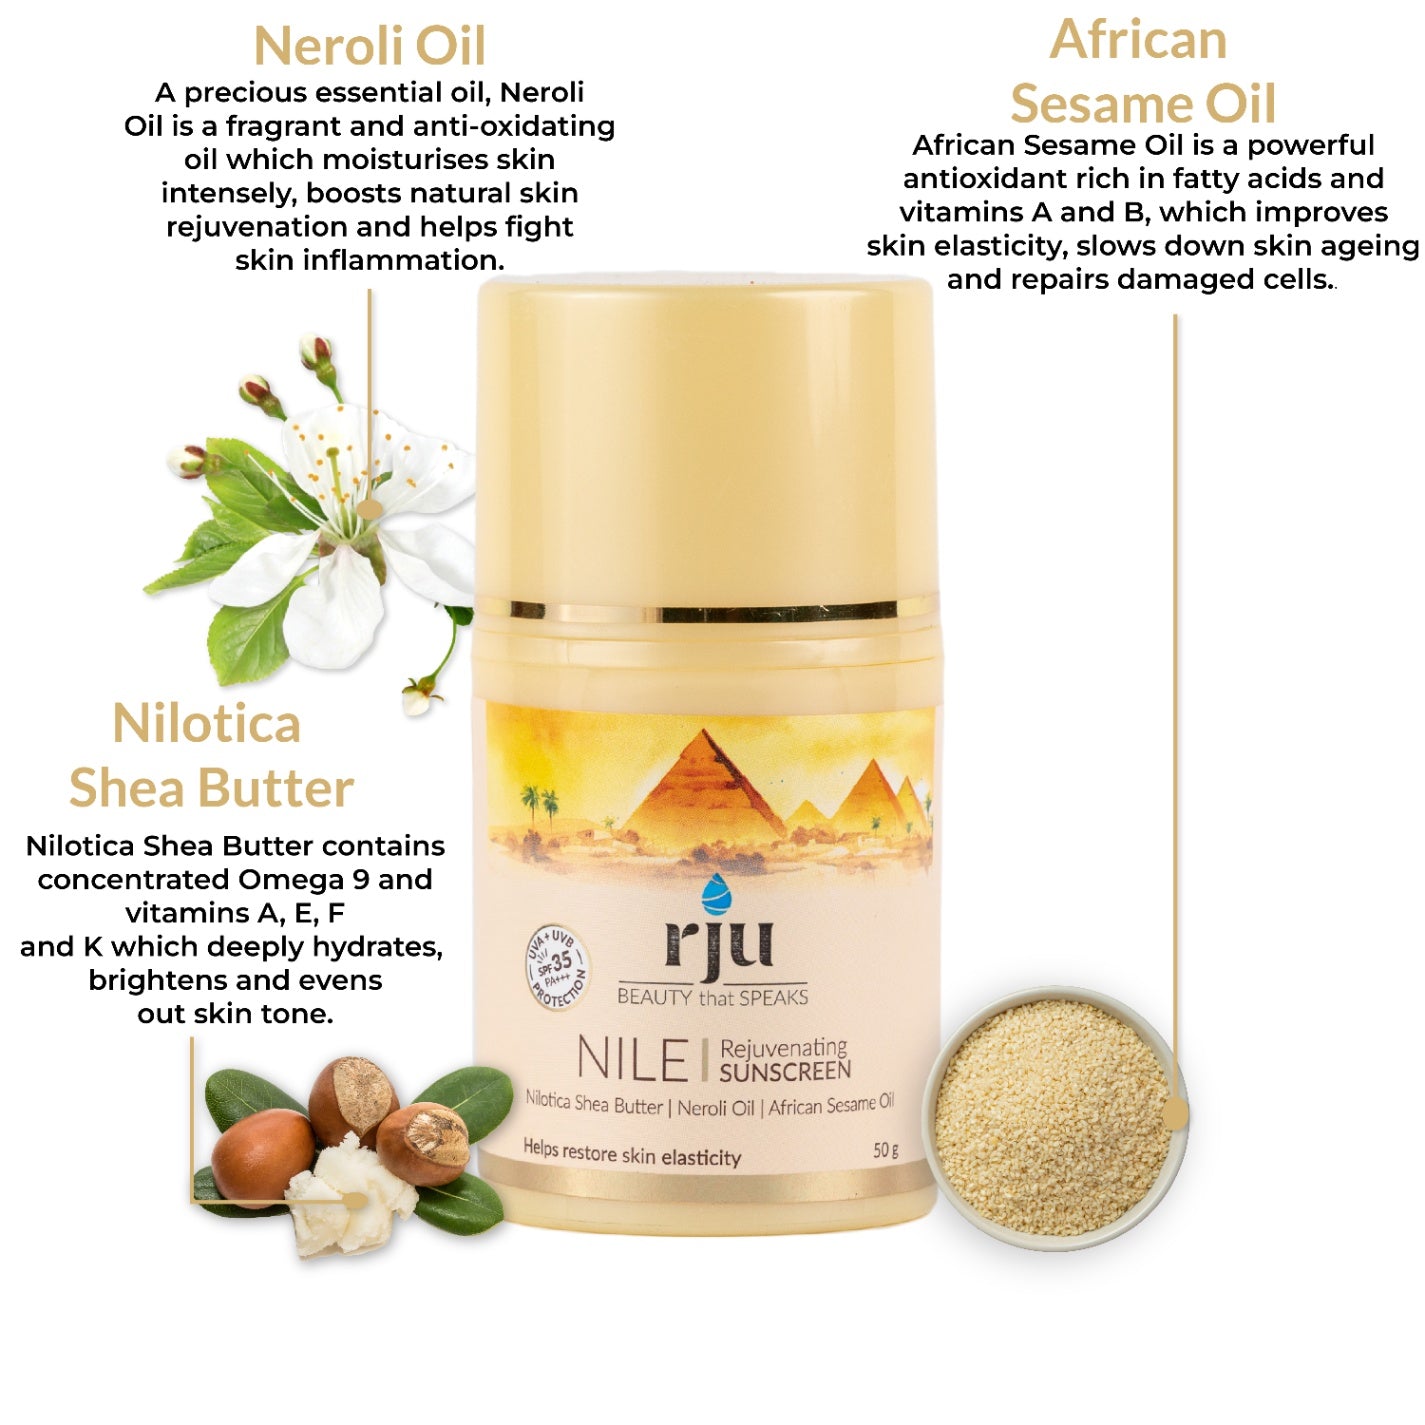 Nile Rejuvenating Sunscreen with SPF 35